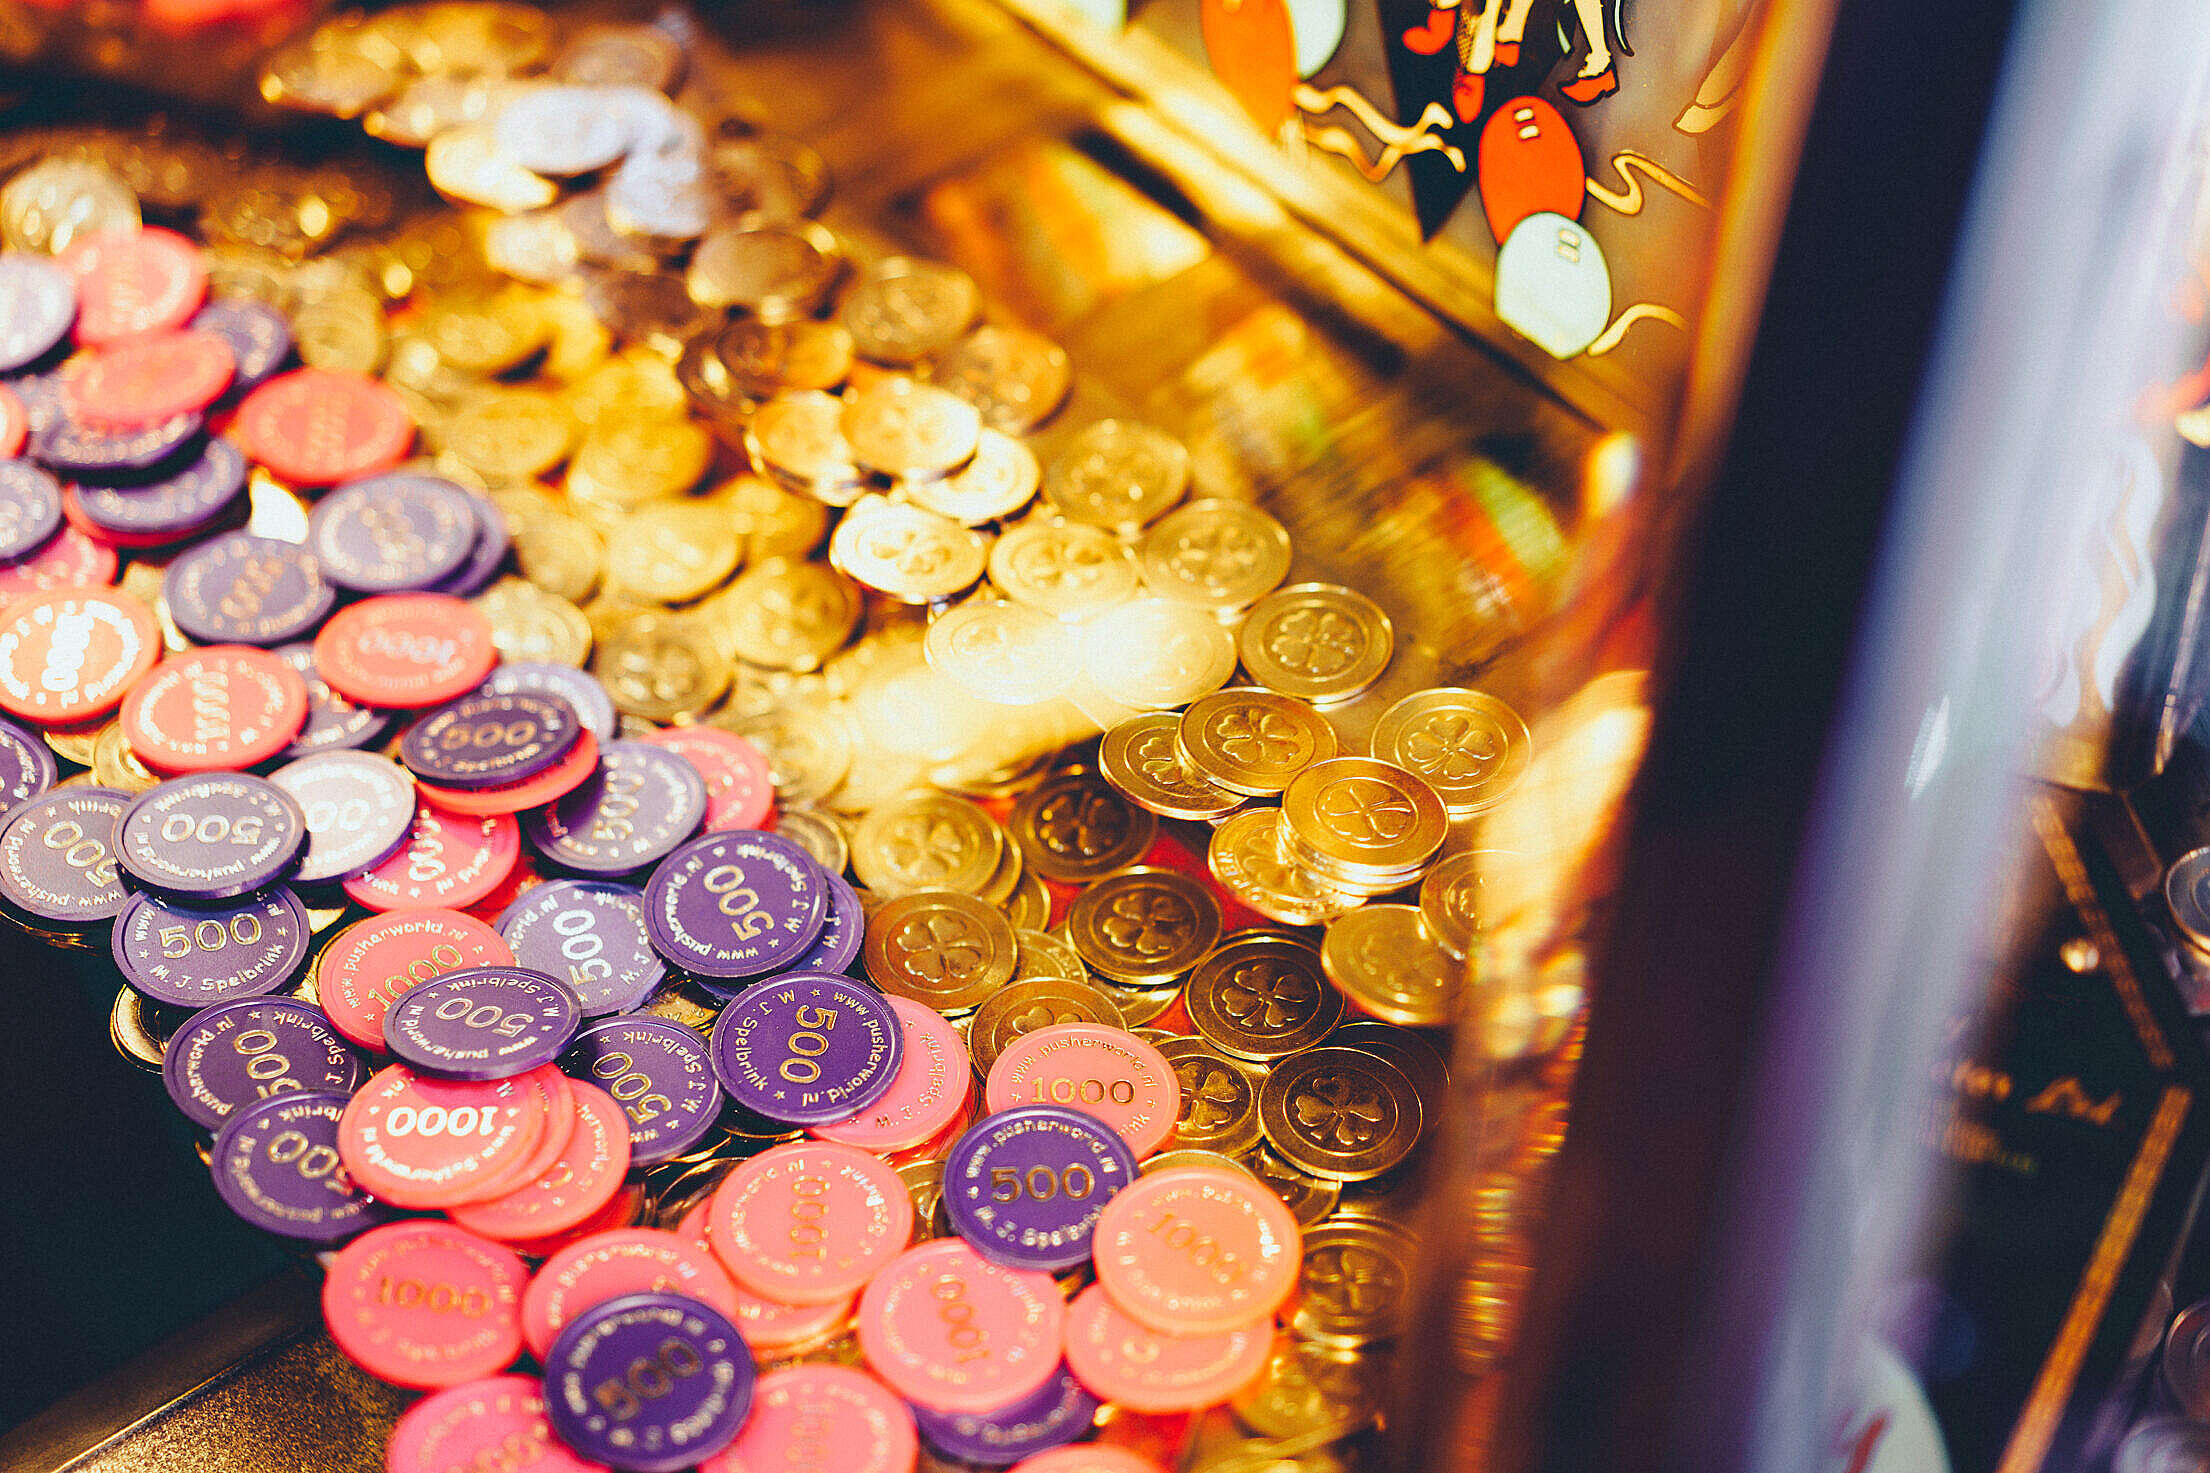 Casino Slot Machine with Coins and Game Chips Free Stock Photo